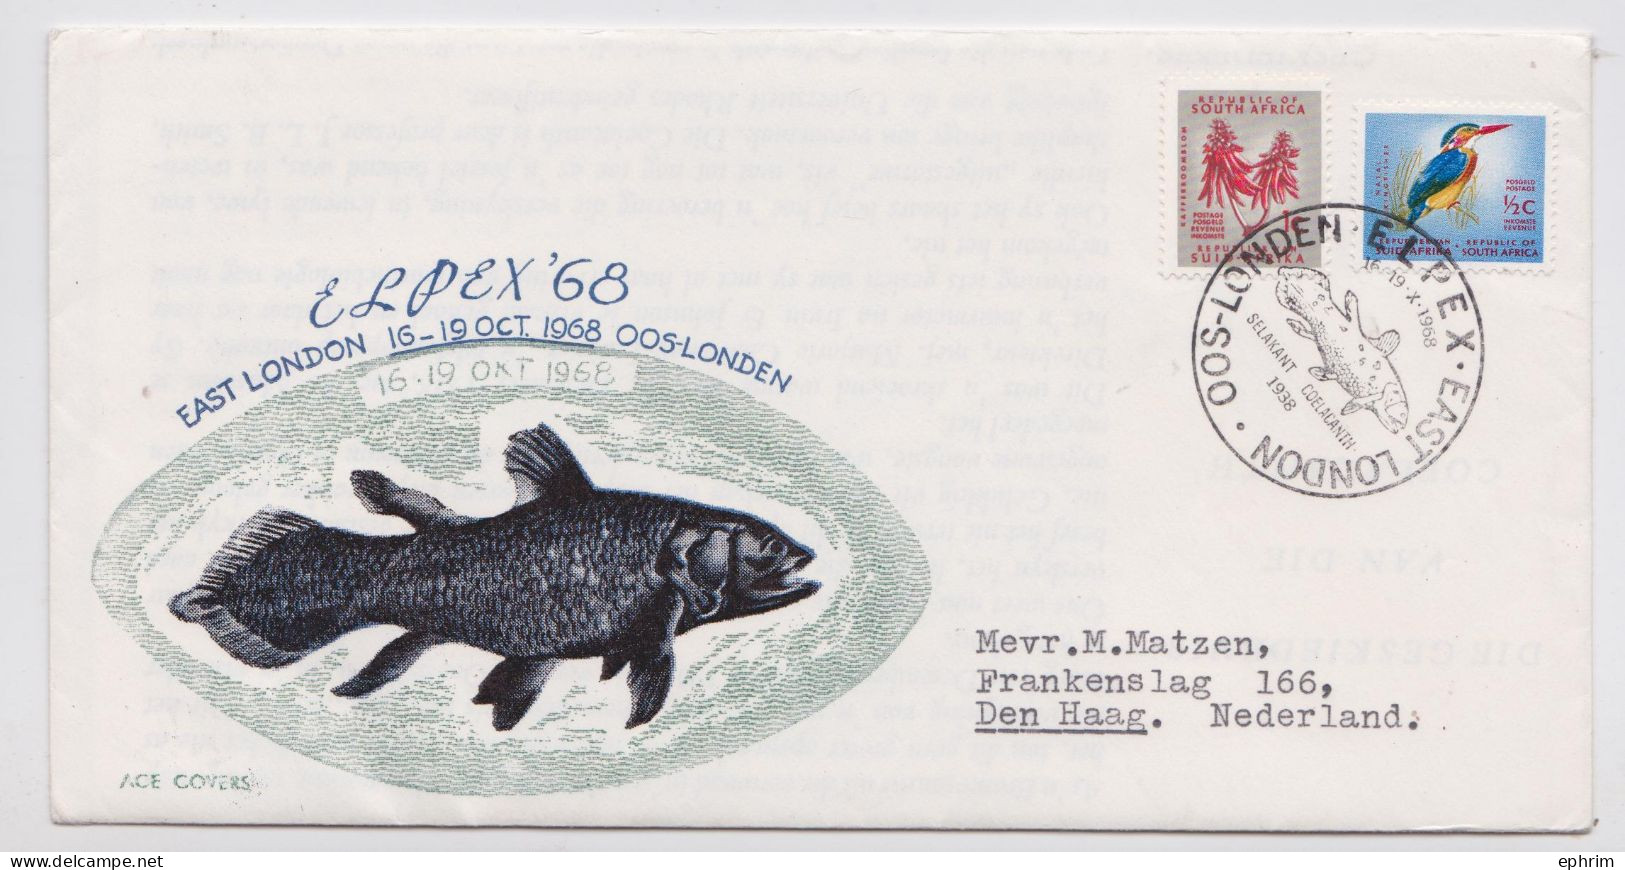 ELPEX 68 EAST LONDON SOUTH AFRICA ENVELOPPE TIMBRE POISSON FOSSILE COELACANTHE FOSSIL COELACANTH SELAKANT STAMP COVER - Covers & Documents